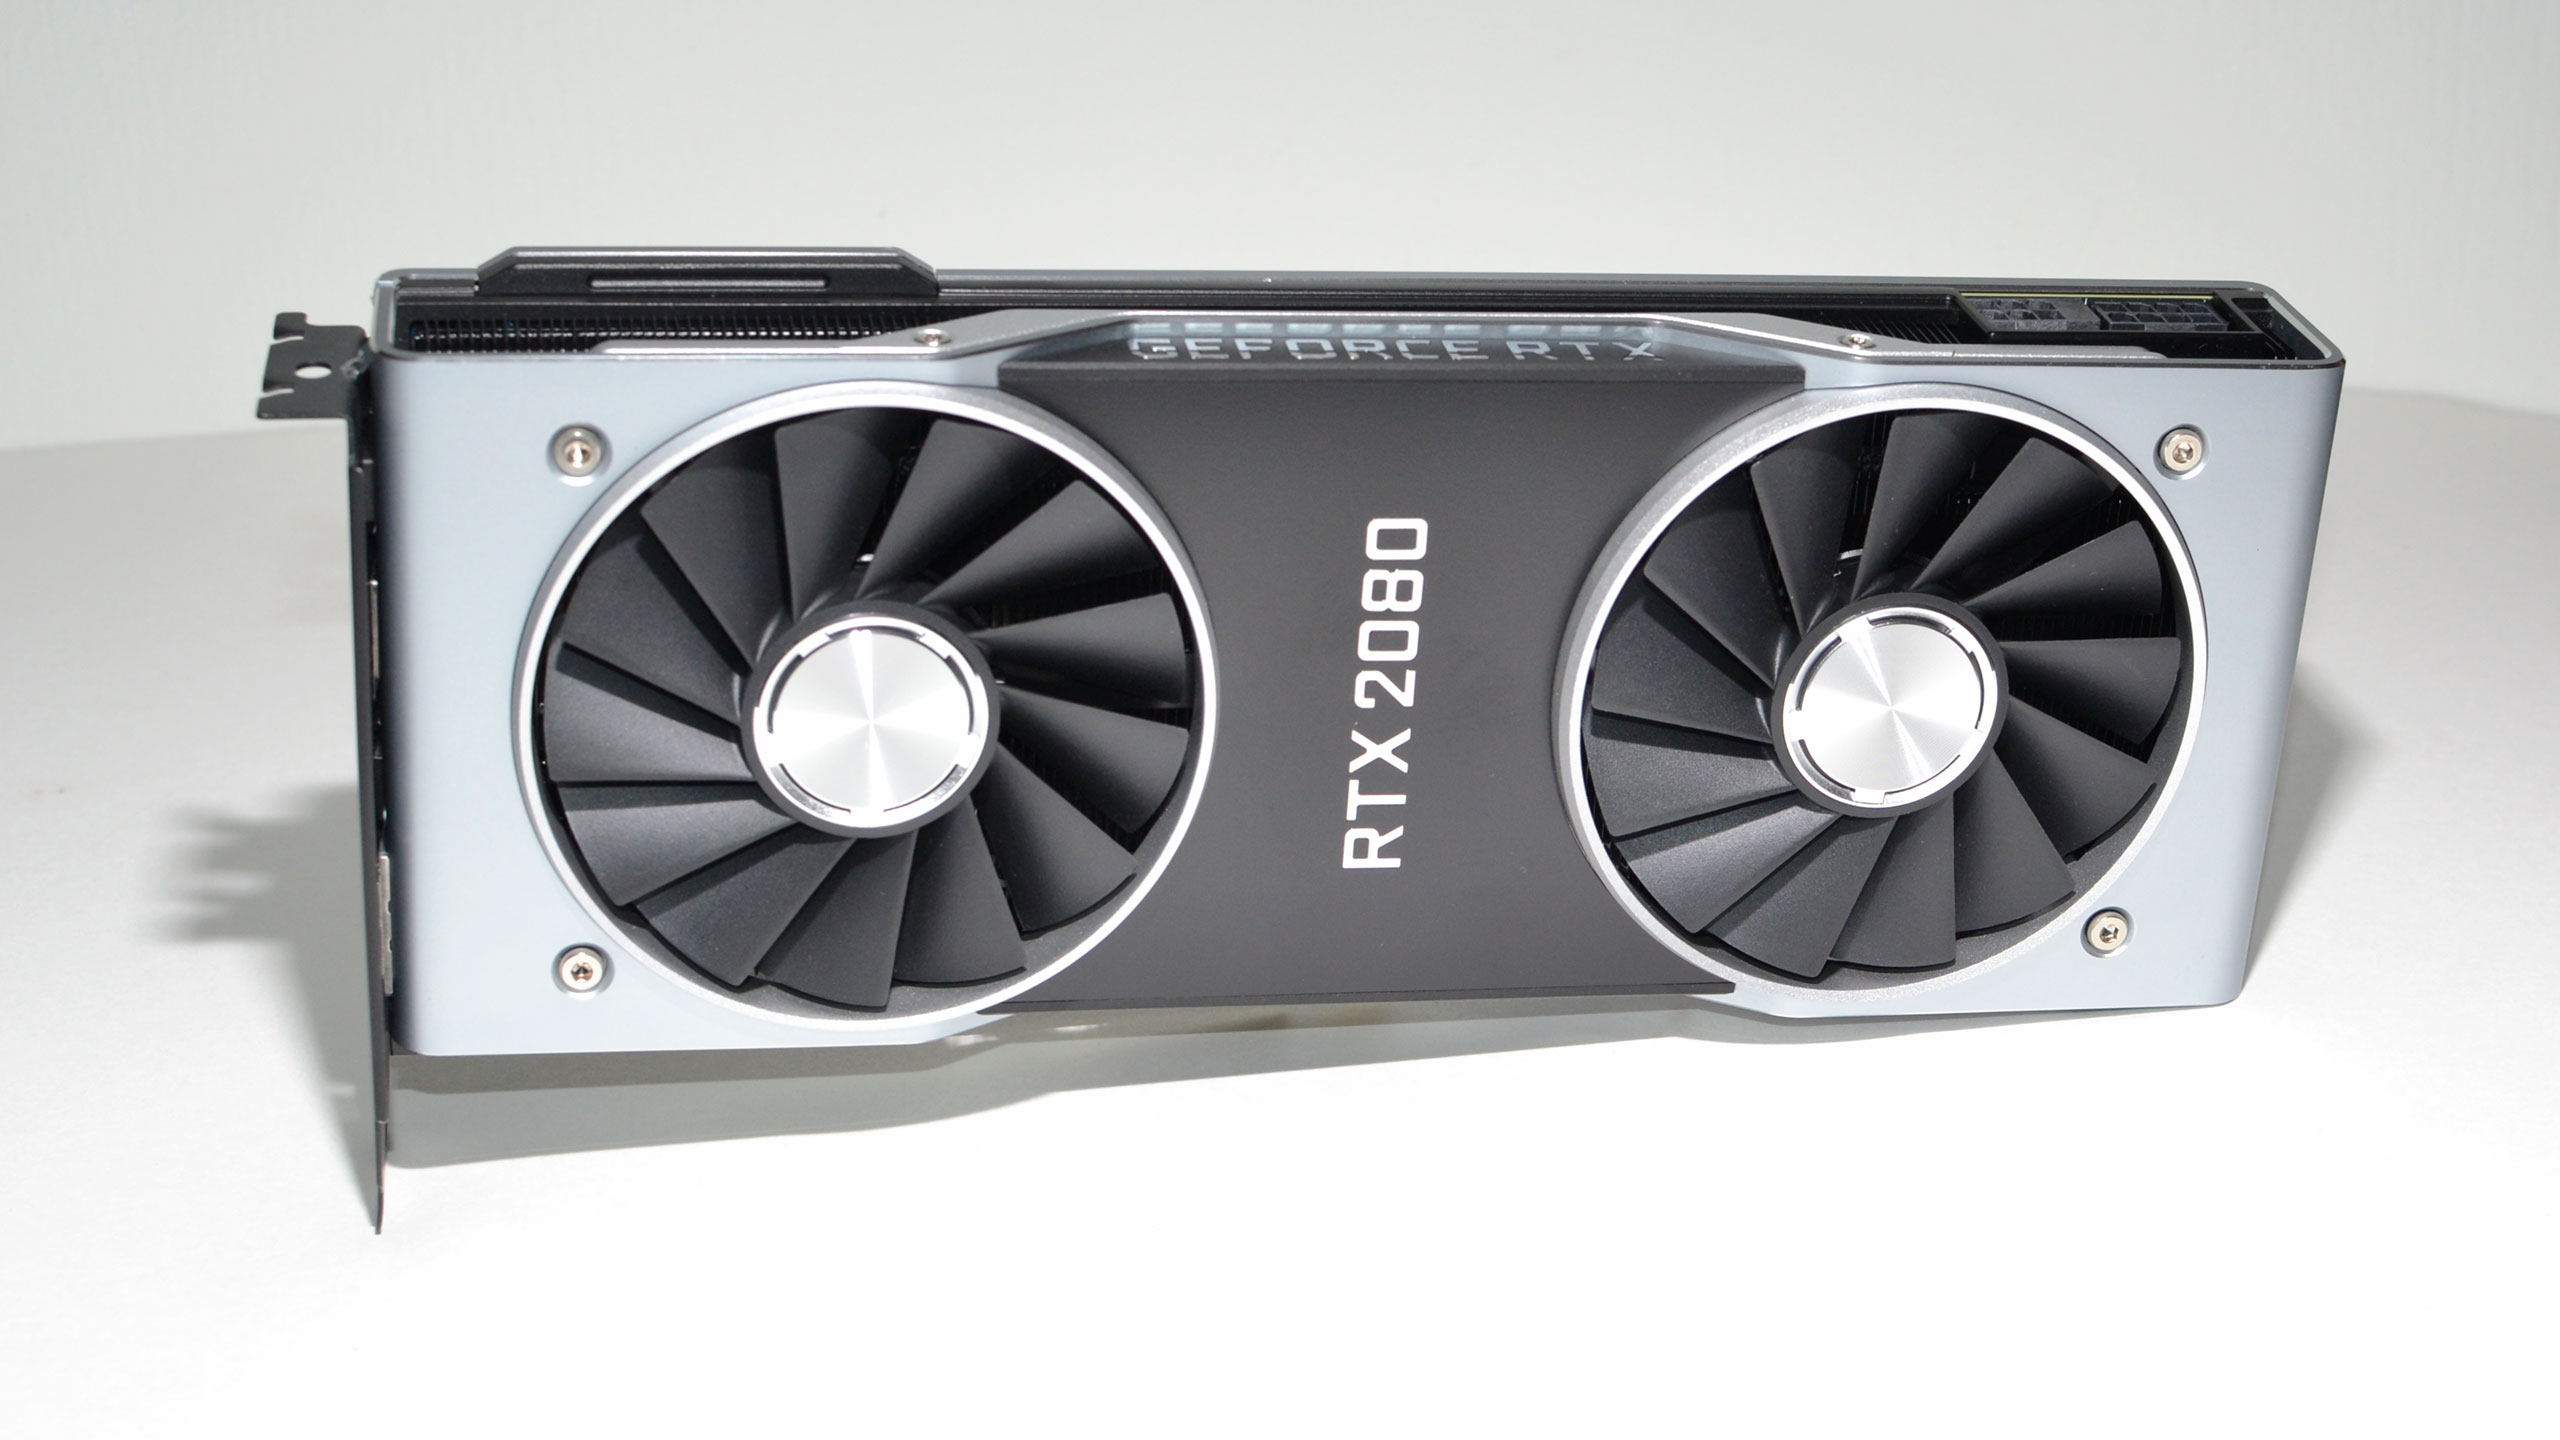 Nvidia GeForce RTX 2080 Founders Edition review